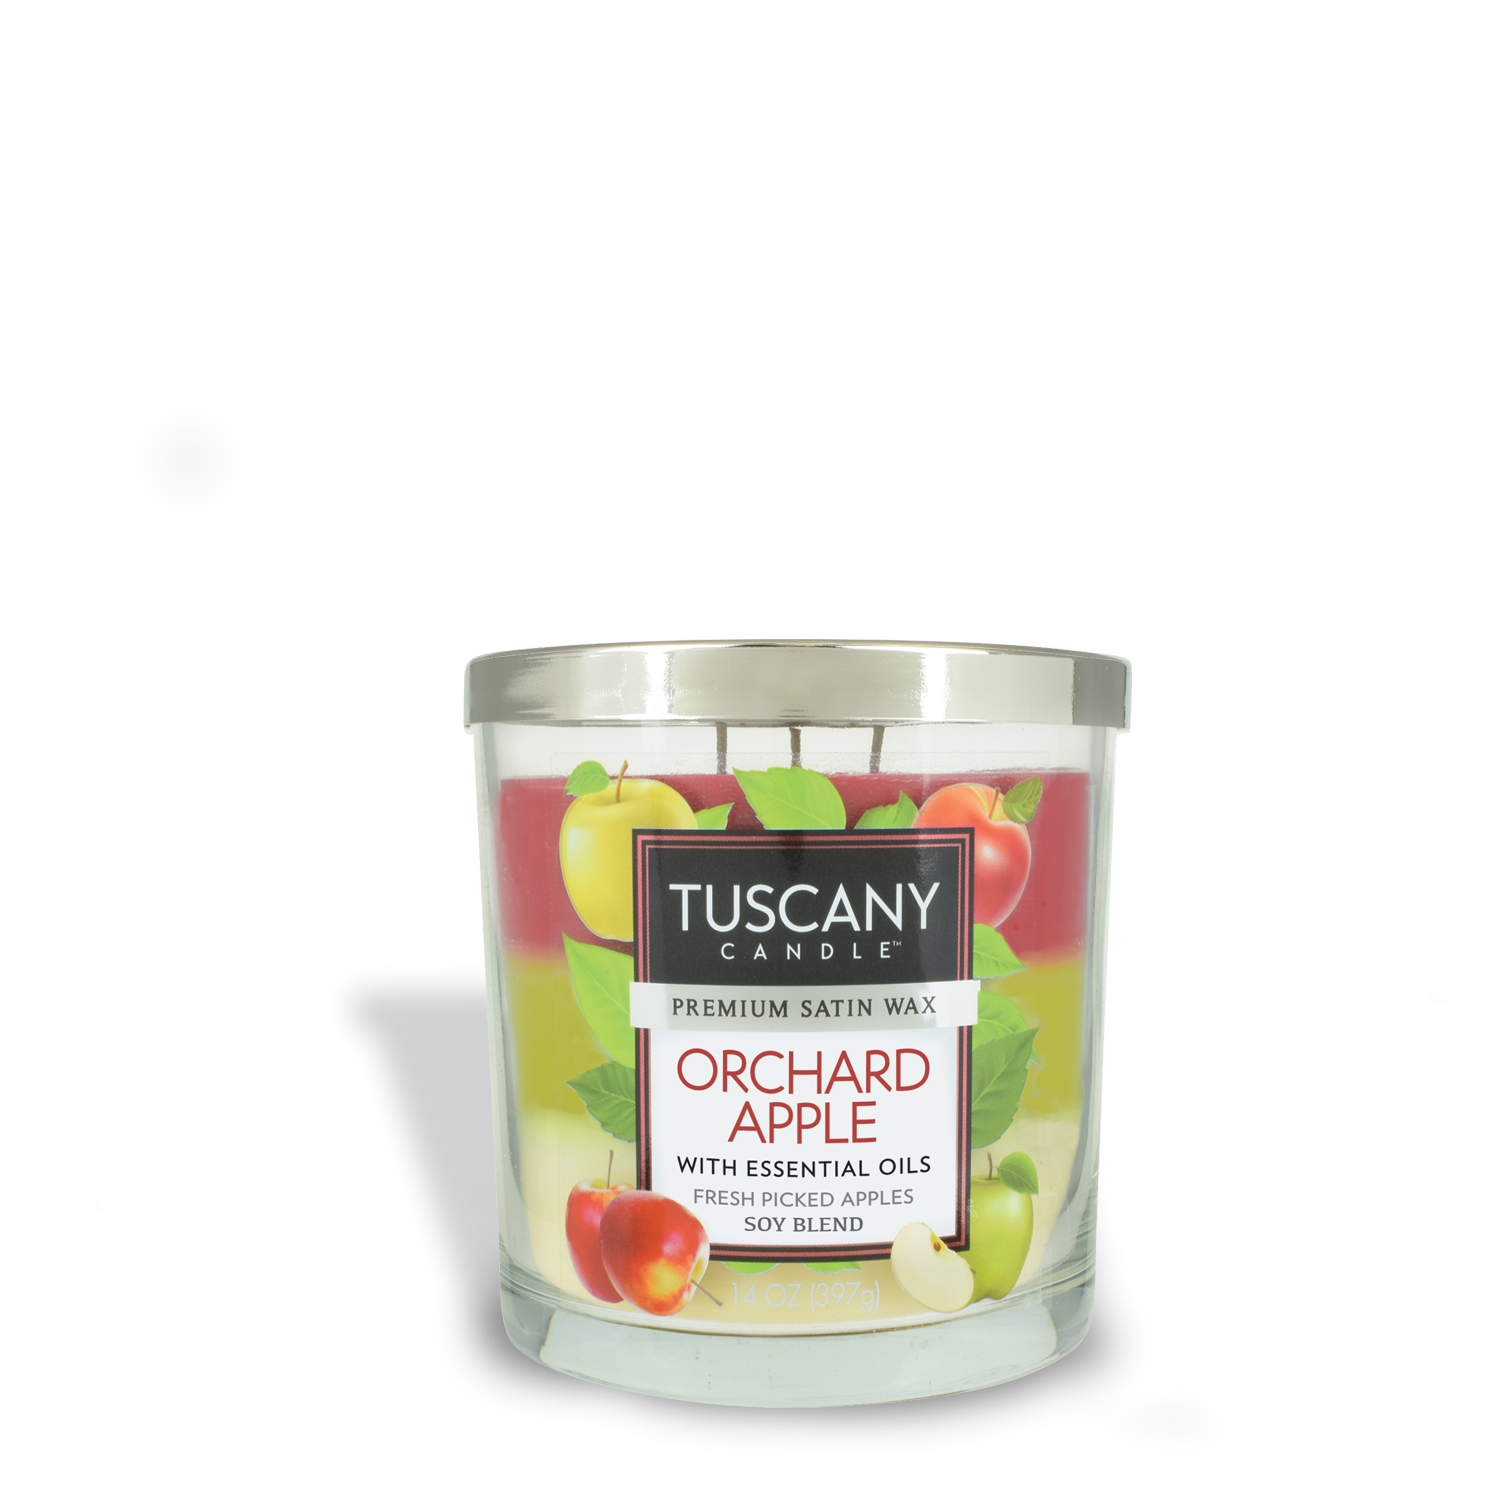 Tuscany Candle® EVD Orchard Apple Long-Lasting Scented Jar Candle (14 oz).